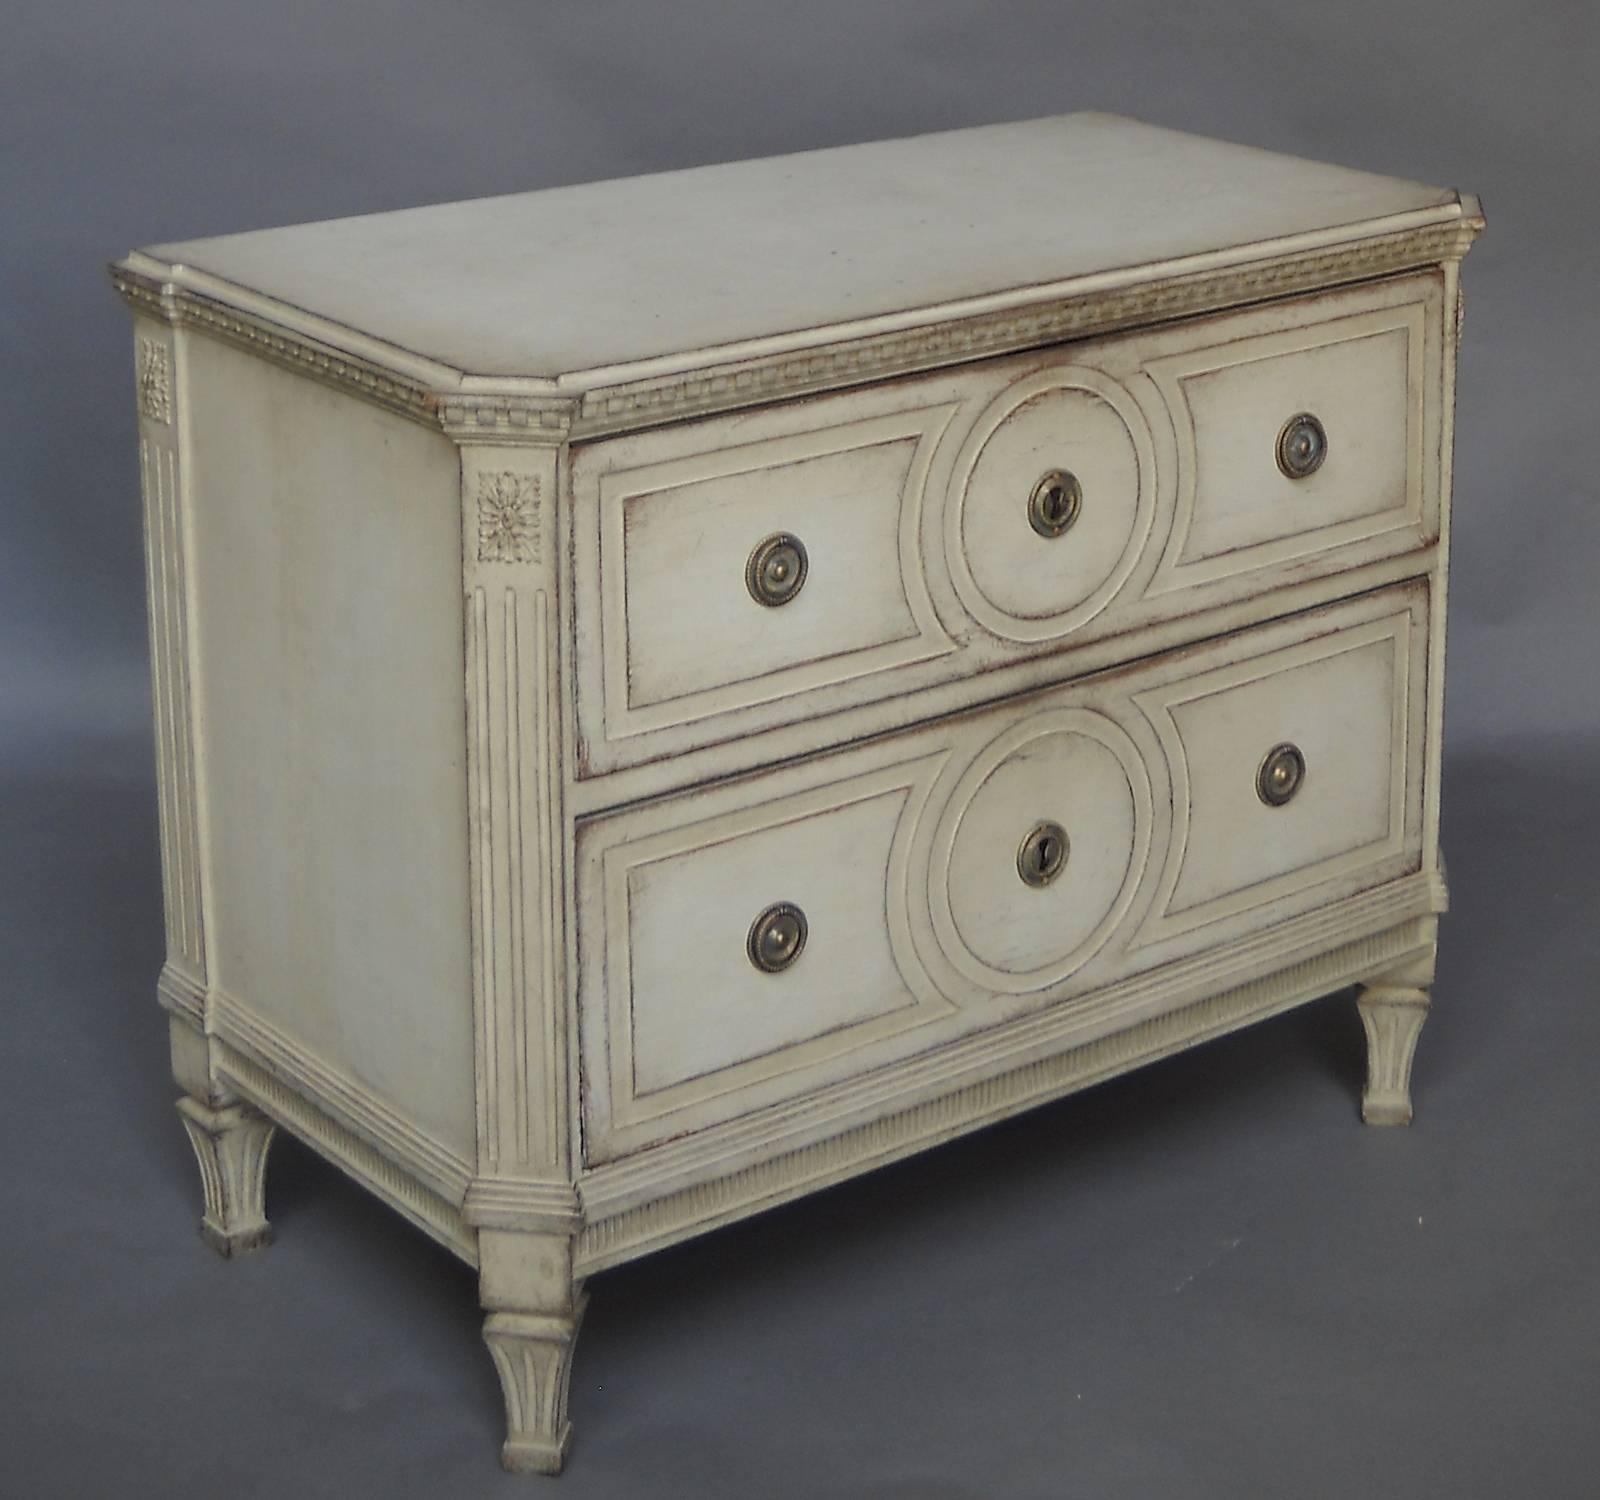 Gustavian chest of two drawers, Sweden, circa 1820, with chamfered corners, fluted corner posts and dentil molding around the top. Raised panel detail and brass fittings on each drawer front. All original with no repairs.